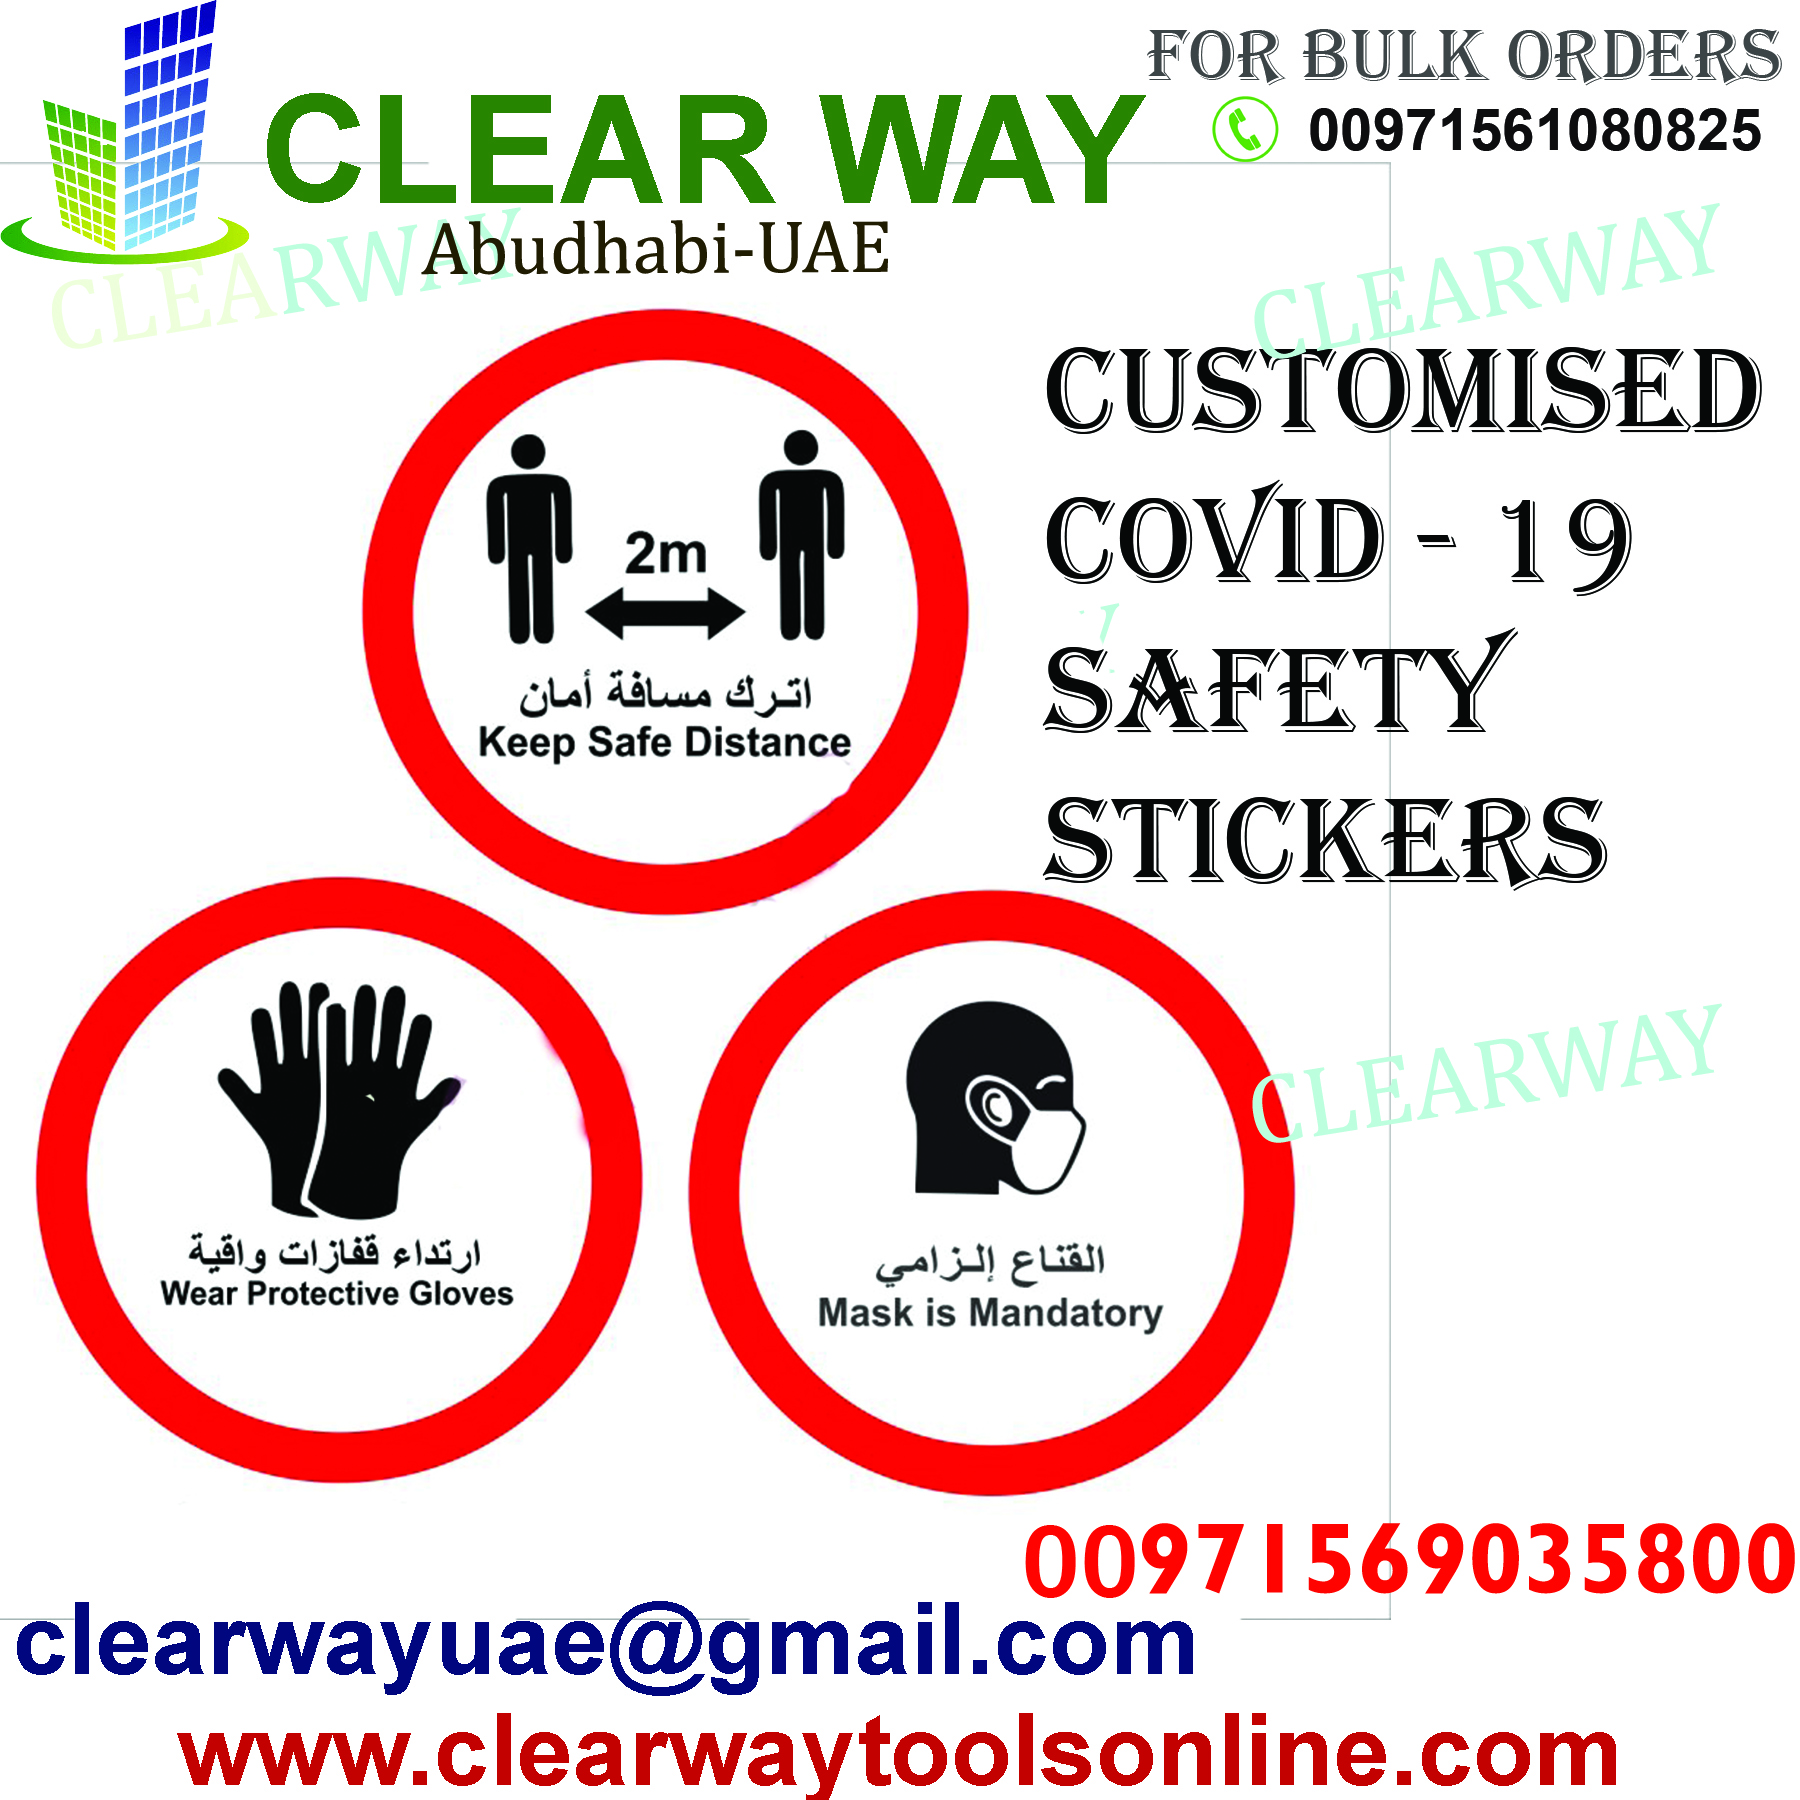 CUSTOMISED COVID-19 SAFETY STICKERS DEALER IN MUSSAFAH , ABUDHABI , UAE BY CLEARWAY